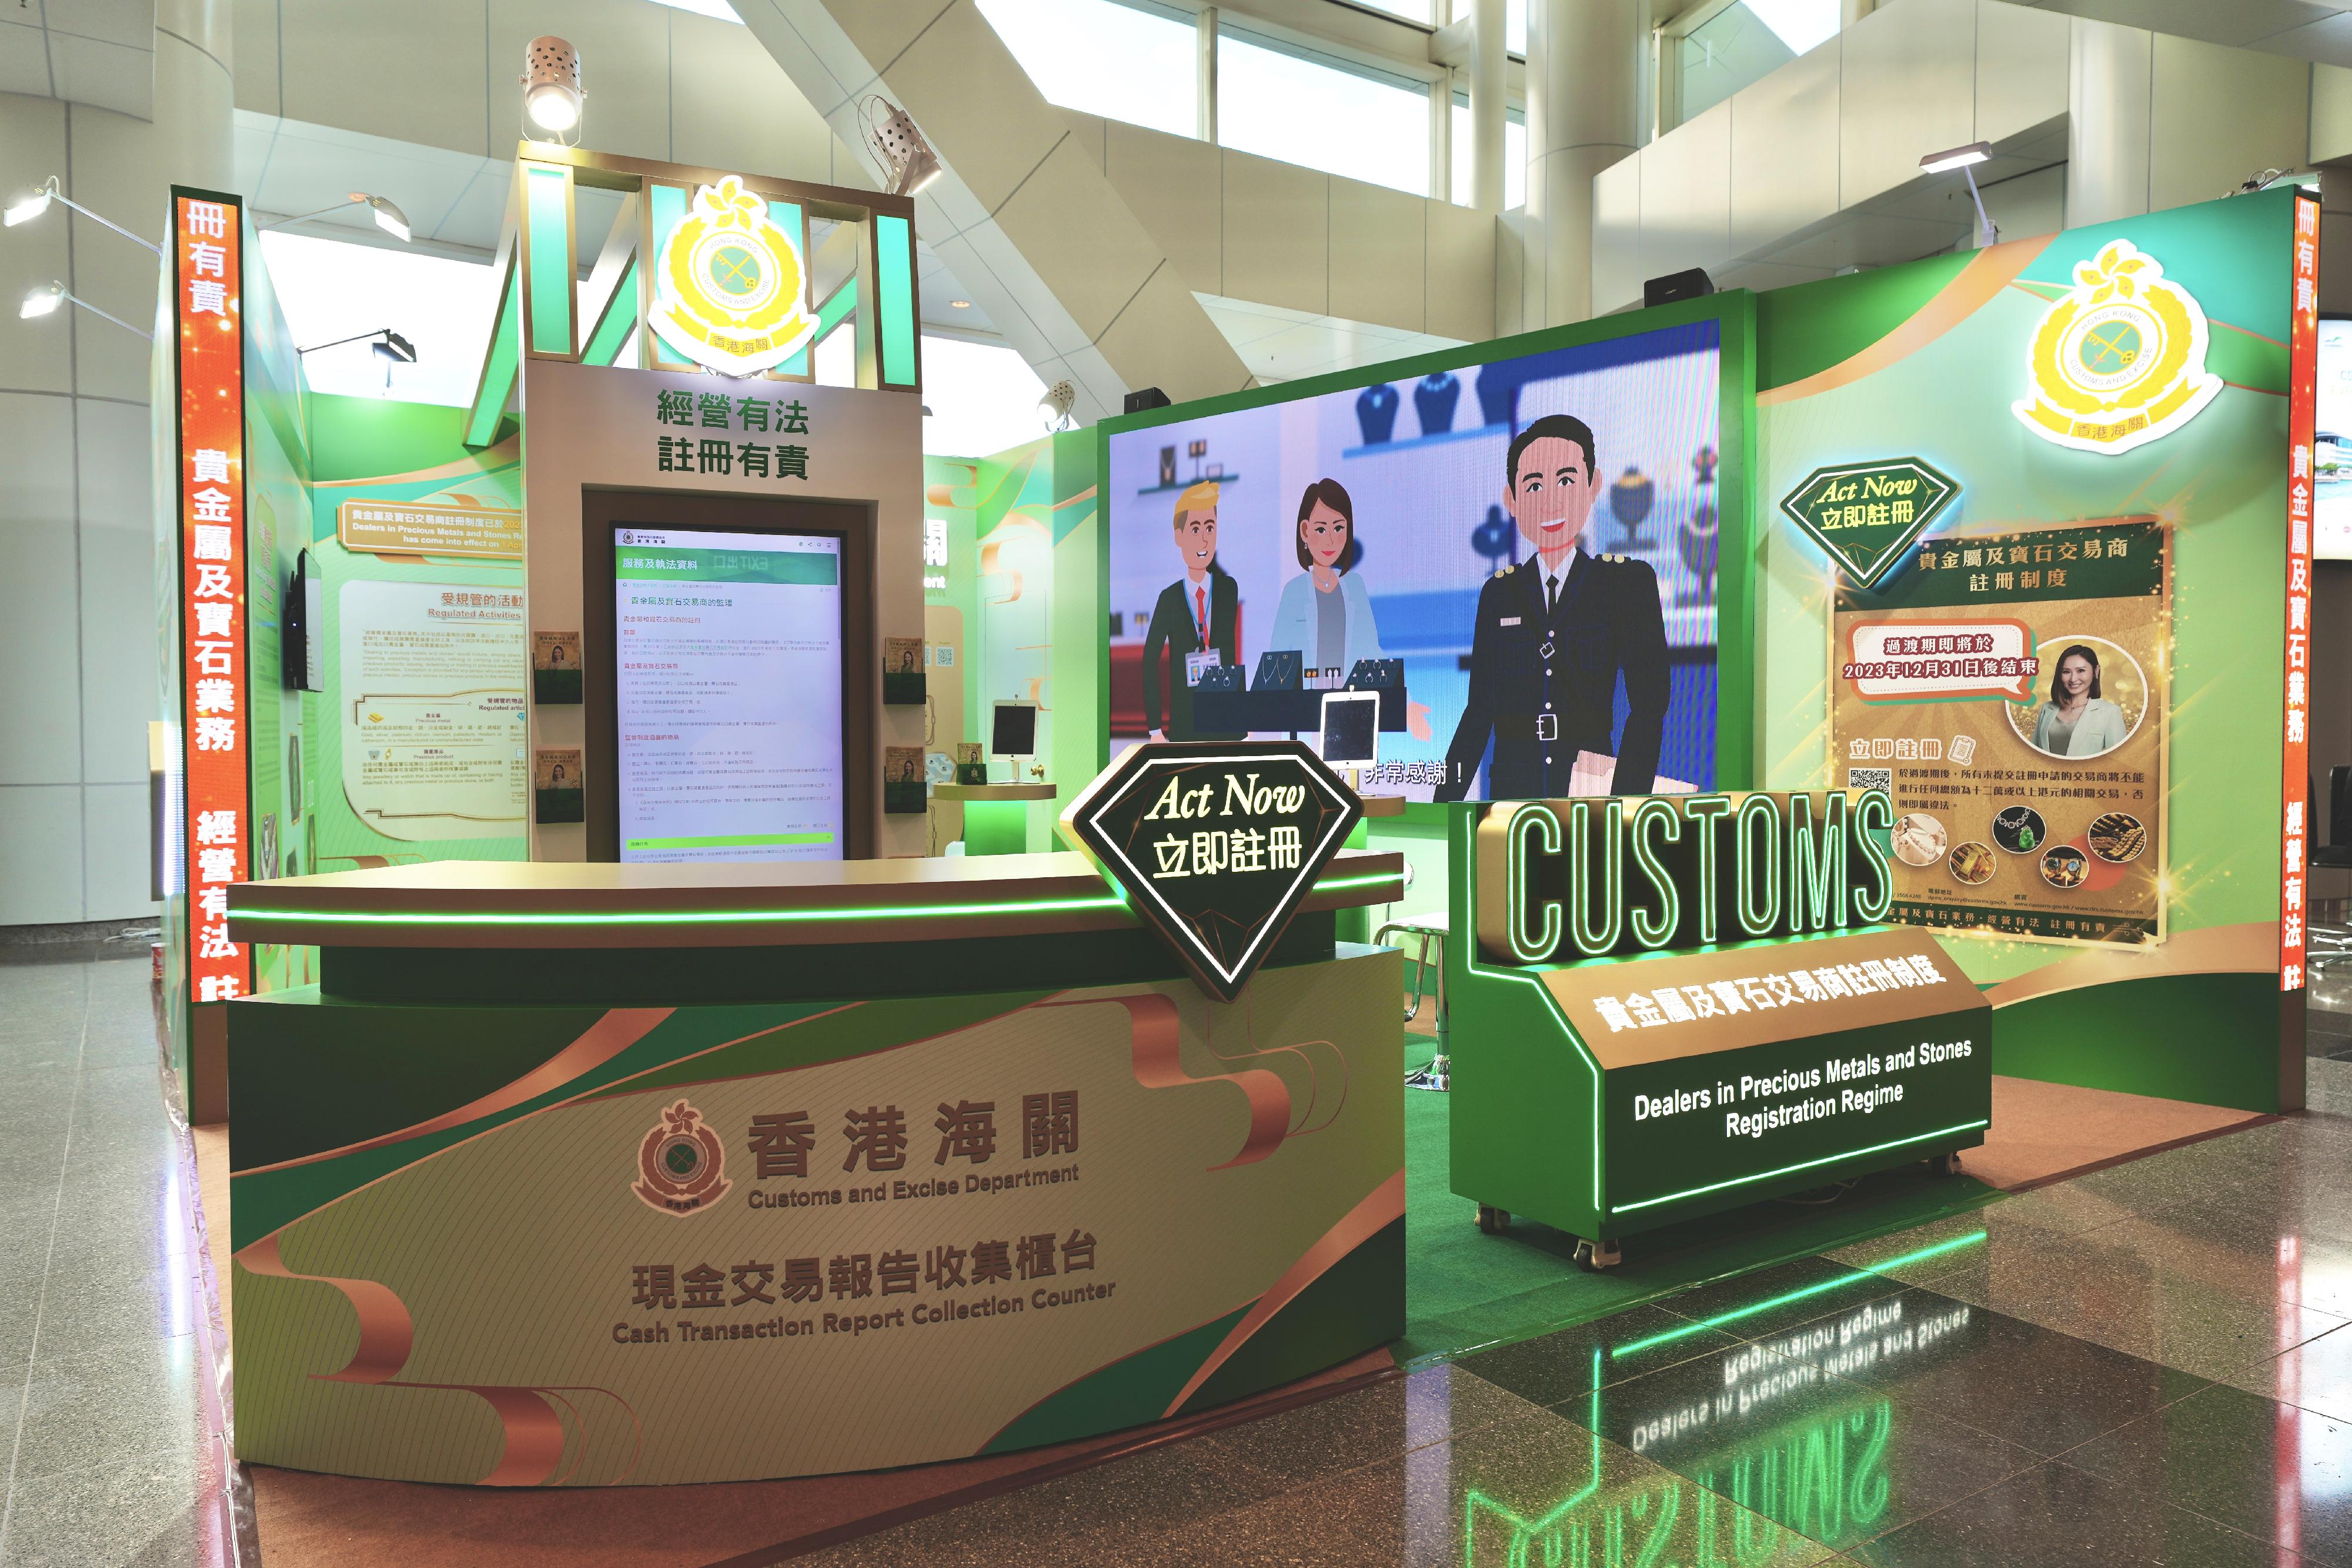 Hong Kong Customs will set up a booth at the JMA Hong Kong International Jewelry Show, to be held at the Hong Kong Convention and Exhibition Centre, from tomorrow (November 30) for four consecutive days to publicise the Dealers in Precious Metals and Stones Regulatory Regime, and will provide on-site counter services to assist non-Hong Kong dealers in submitting a cash transaction report during their participation in the exhibition. Photo shows the Hong Kong Customs' booth.